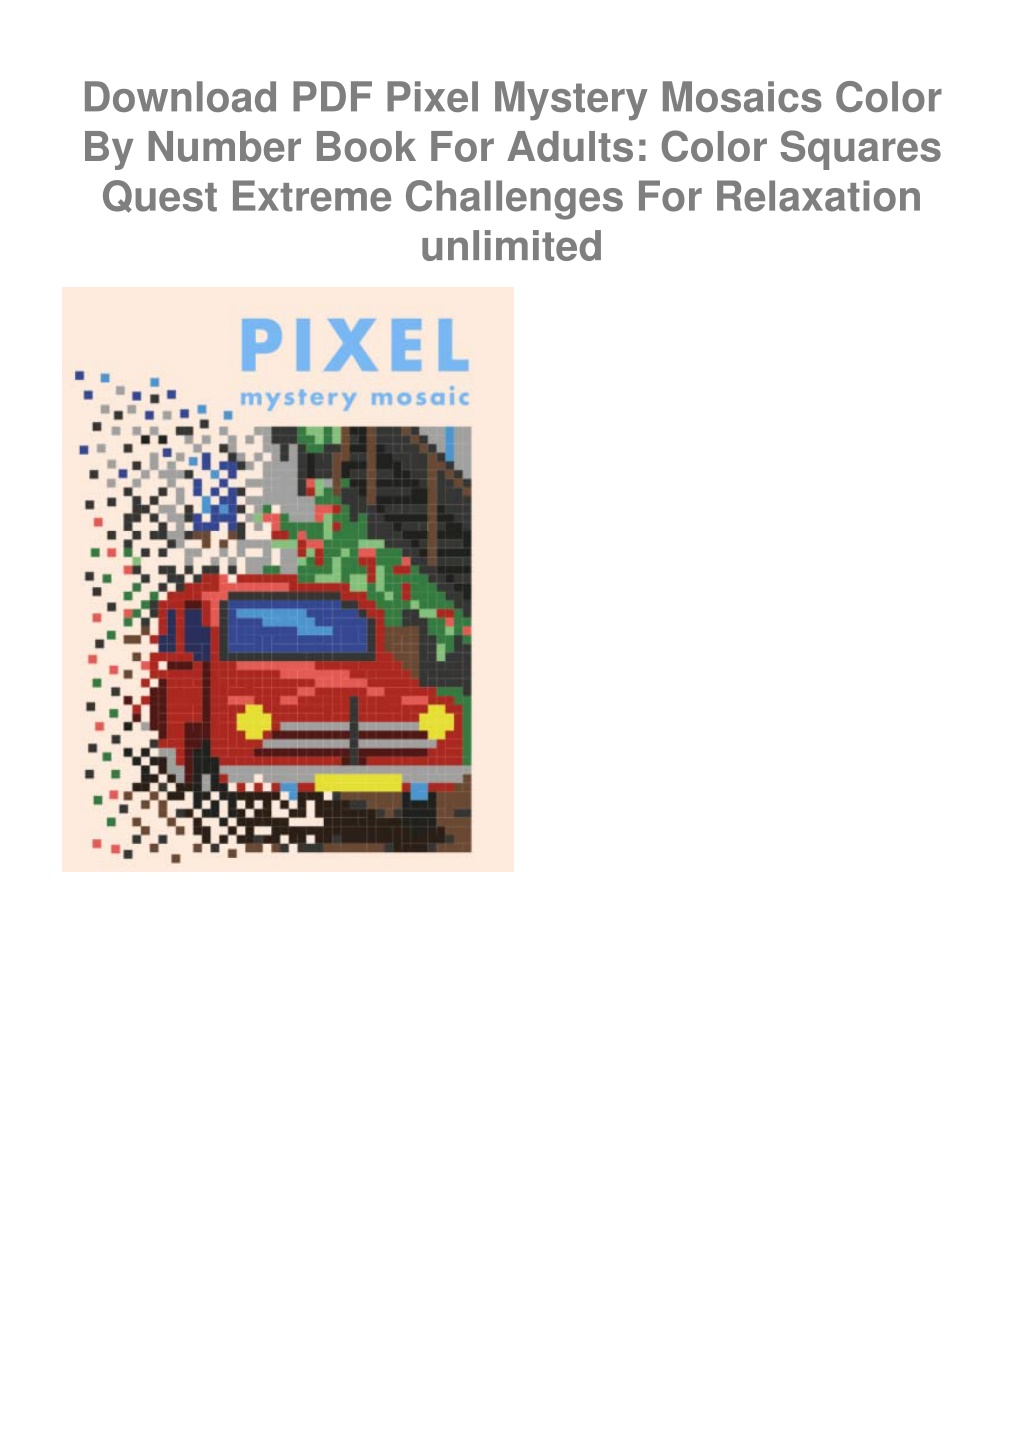 New Large Print Mystery Mosaics Color By Number: Pixel Art For Adults &  Kids, Fun 50 Coloring Pages for Stress Relief & Relaxation, Gift Ideas.  (Paperback)